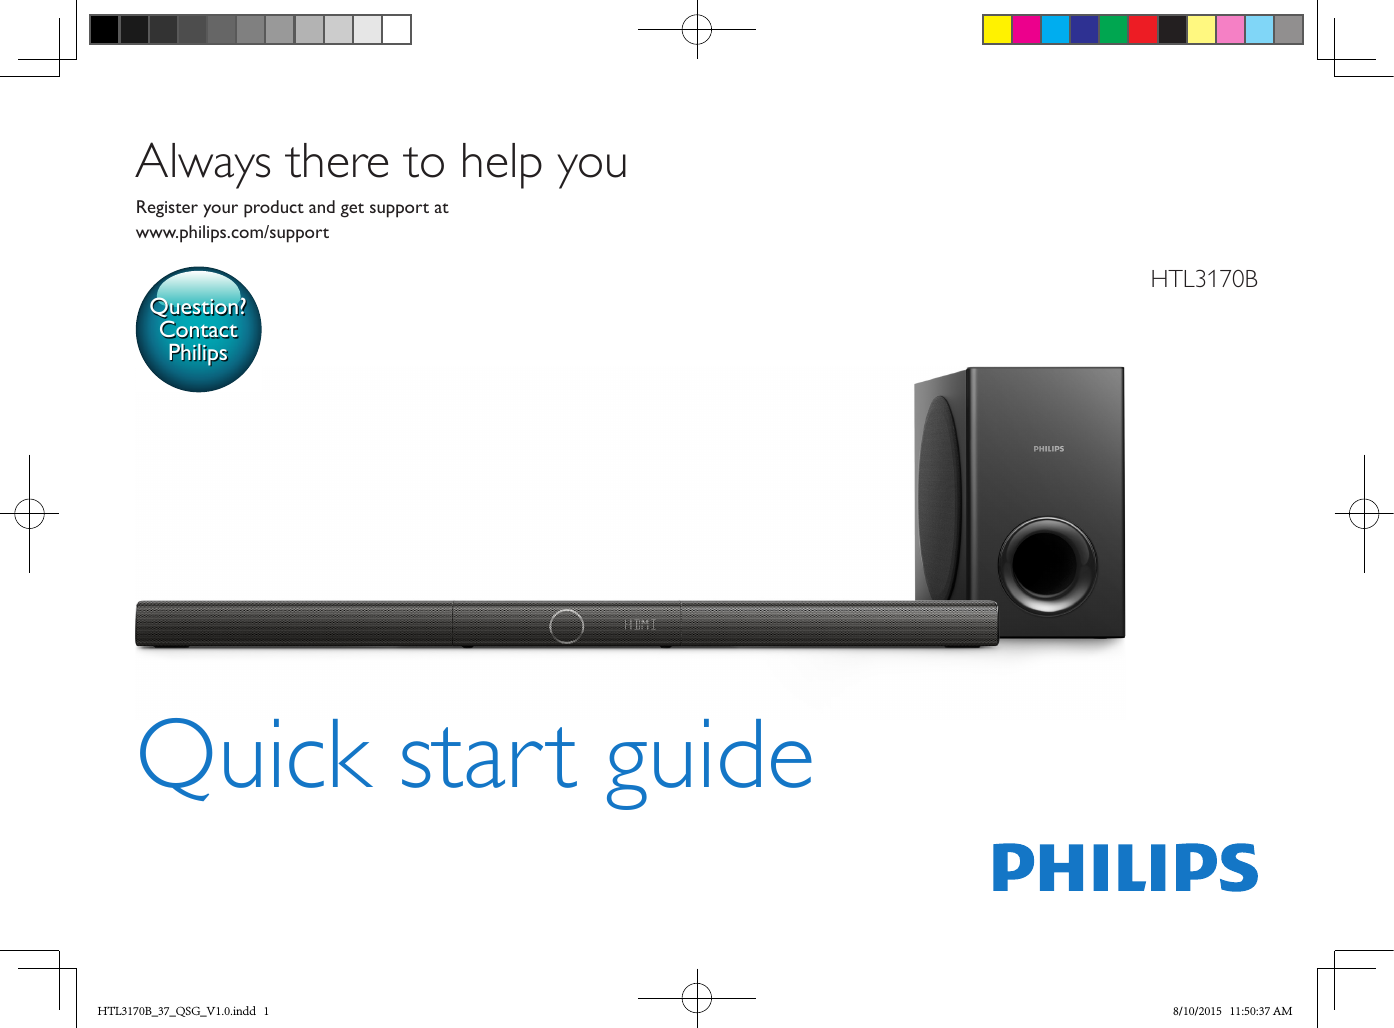 HTL3170BQuick start guideRegister your product and get support atwww.philips.com/supportAlways there to help youQuestion?Contact PhilipsHTL3170B_37_QSG_V1.0.indd   1 8/10/2015   11:50:37 AM